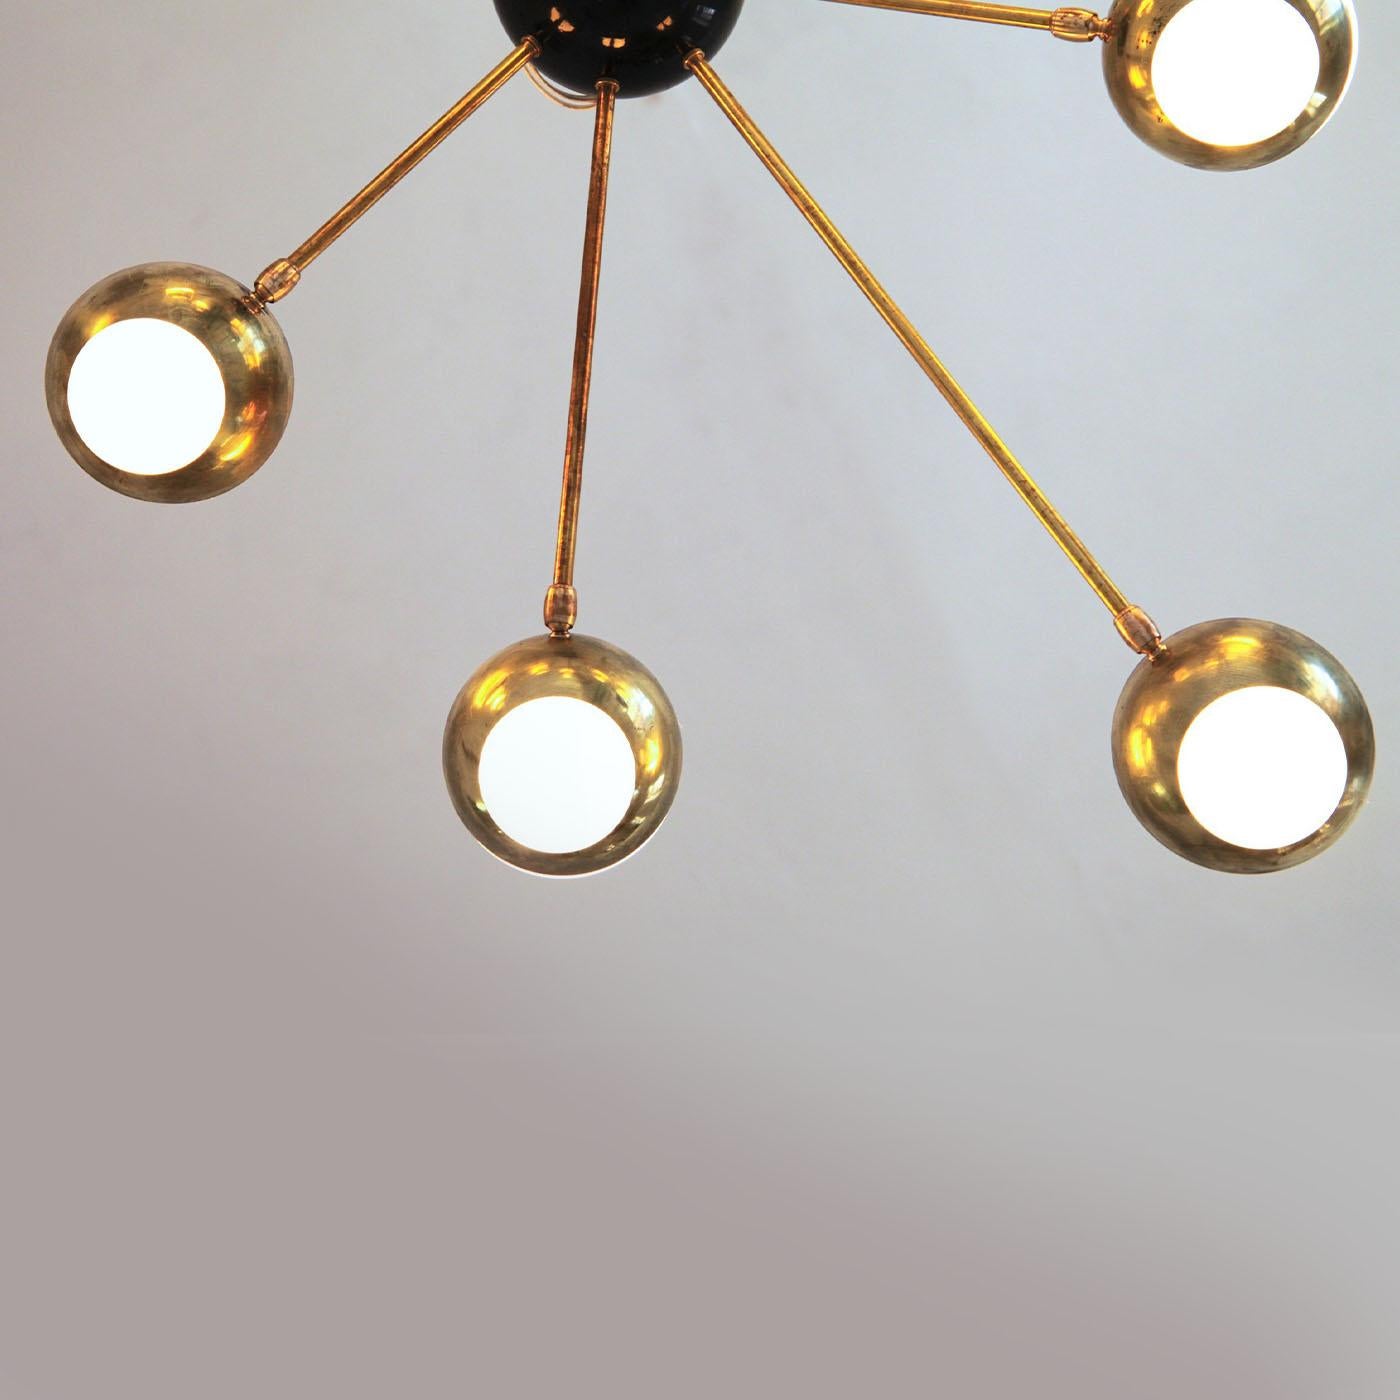 Distinguished by a captivating asymmetrical design with spokes radiating from a black ceiling mount, this precious brass chandelier owes its name (the Italian for nest) to the shape of the pivoting elements welcoming the glass spheres. A patient